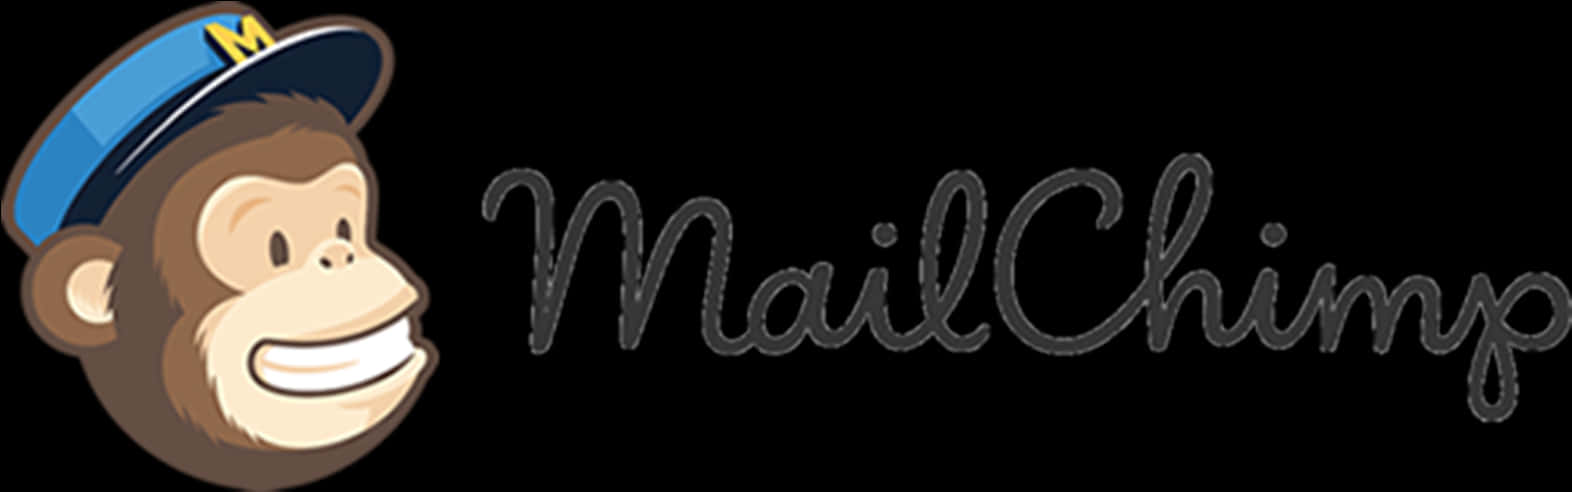 Mailchimp Logo With Smiling Icon